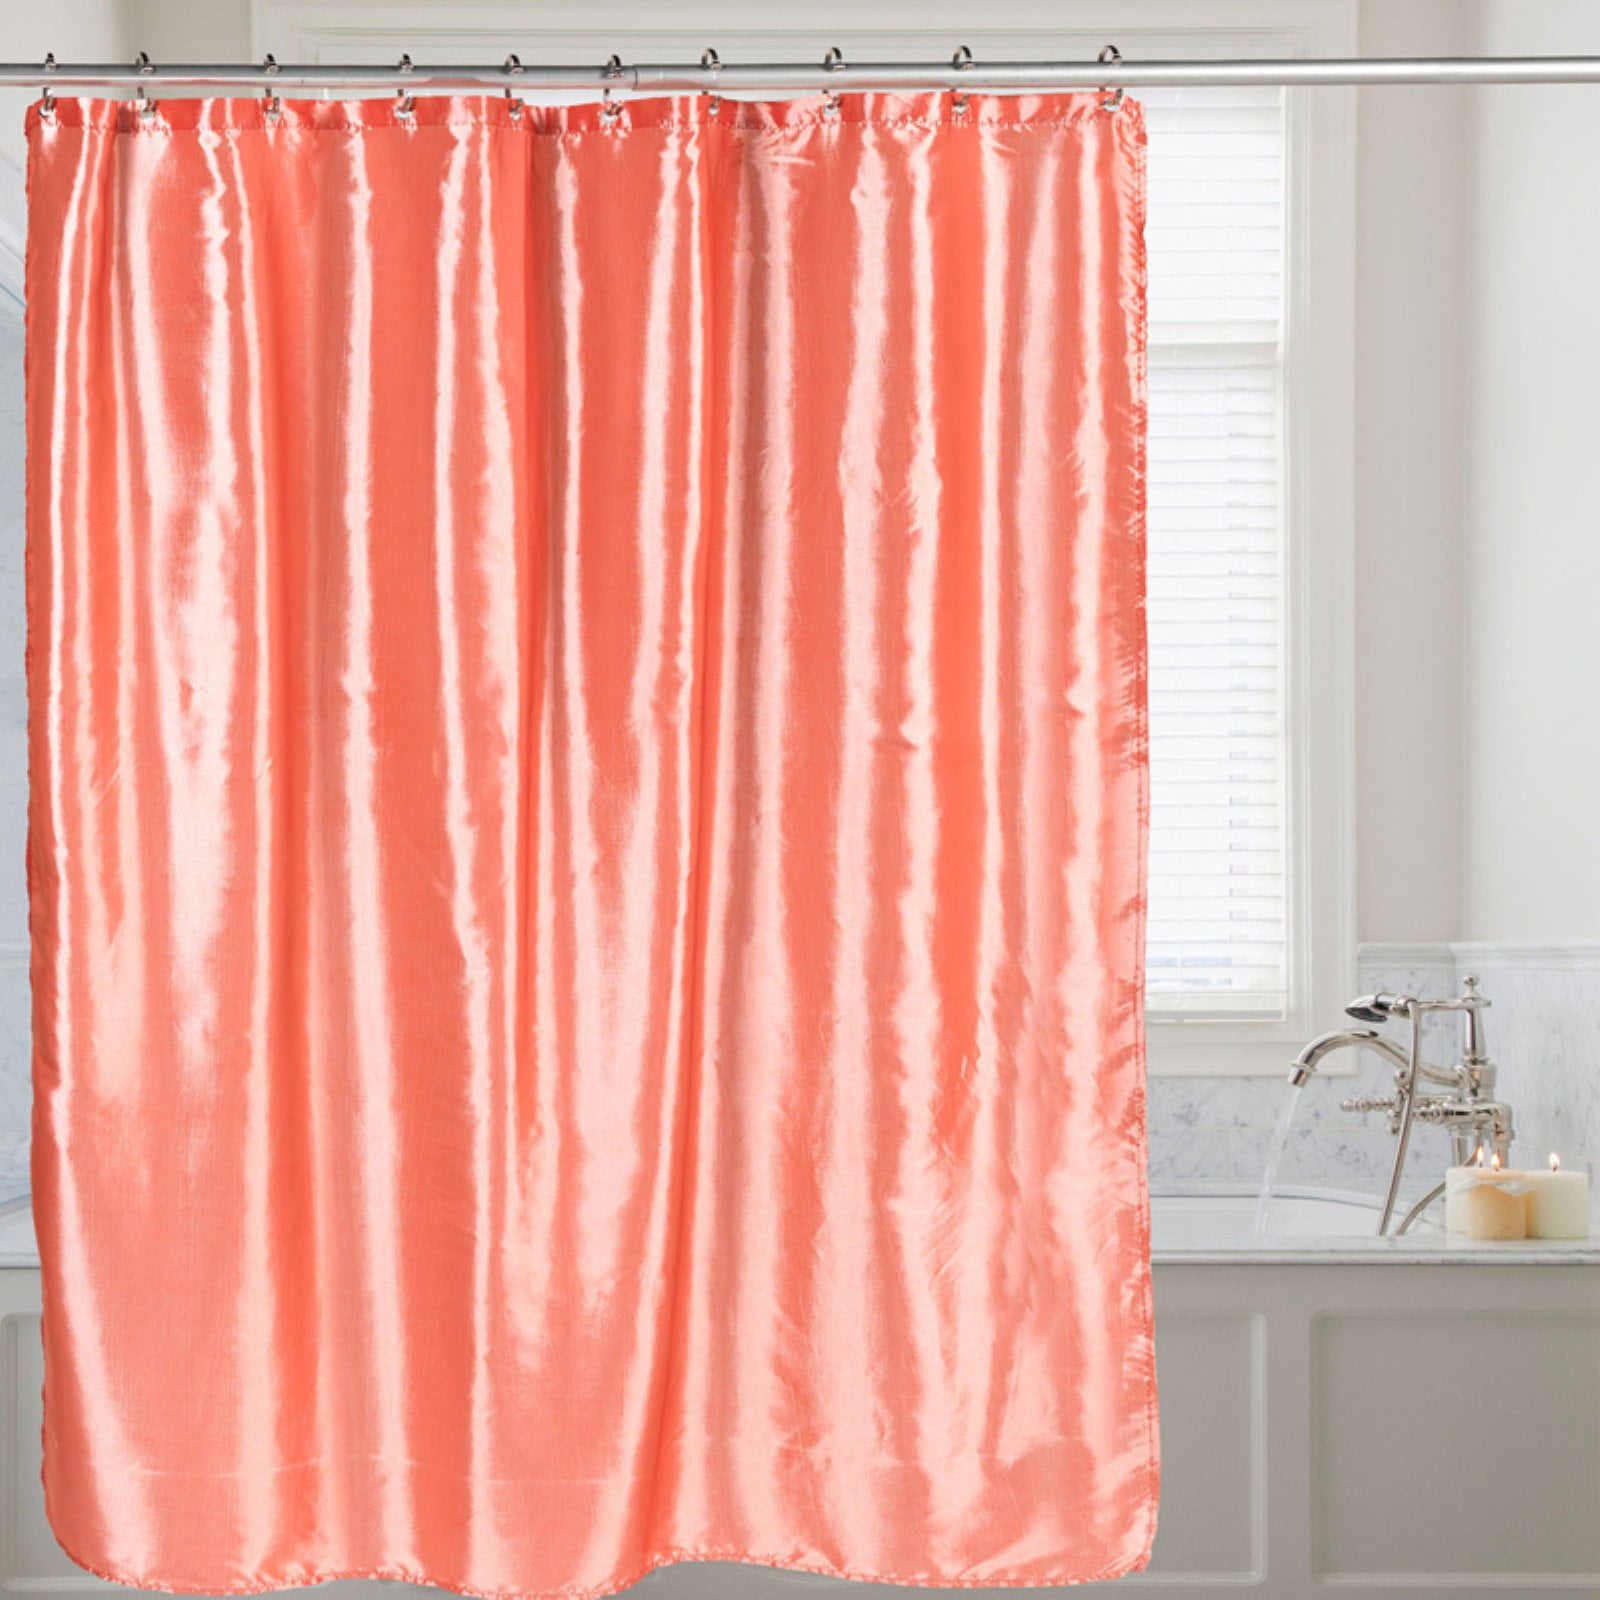 Carnation Home "Shimmer" Faux Silk Shower Curtain in Sage 